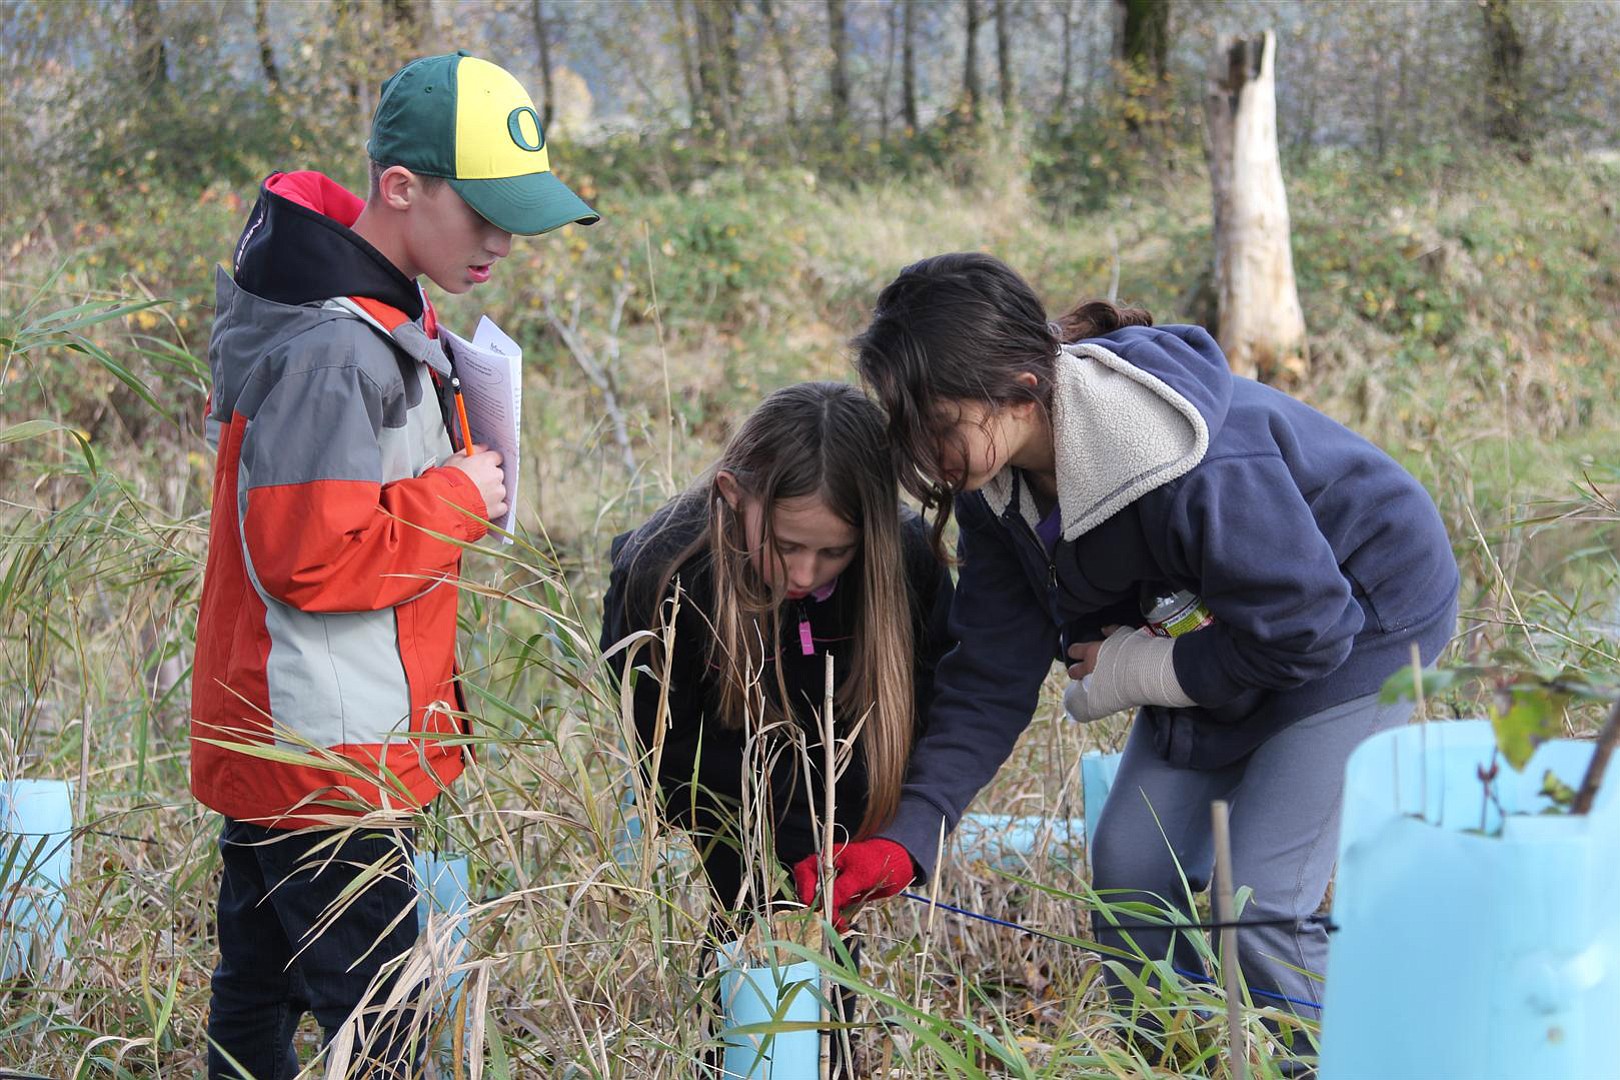 Lower Columbia Estuary Partnership
Students who work in the Steigerwald National Wildlife Refuge thanks to grants from the Camas-Washougal Community Chest &quot;get to experience what they never might have otherwise -- touching, handling, working with the natural world,&quot; Dave Pinkernell said. &quot;They're always covered in rain and mud. And they love it. You can see it in their eyes.&quot;